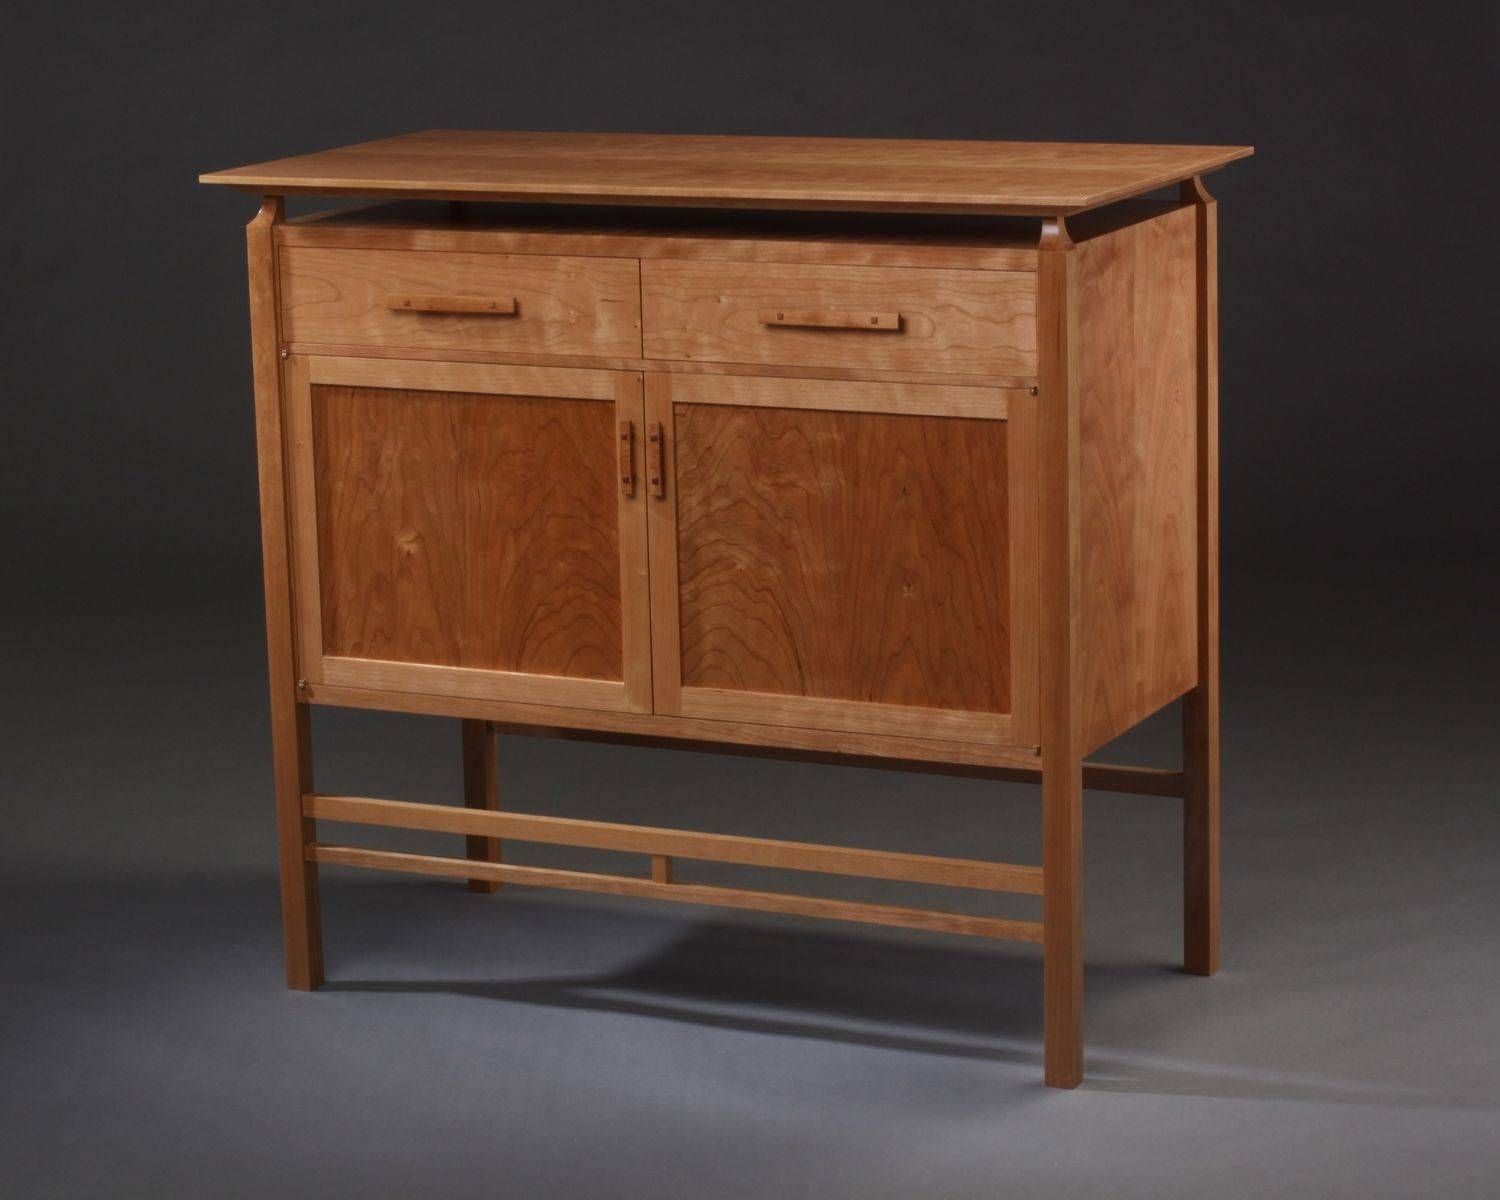 Mission Sideboards | Craftsman, Arts And Crafts, Stickley Style Within Newest Mission Style Sideboards (View 9 of 15)